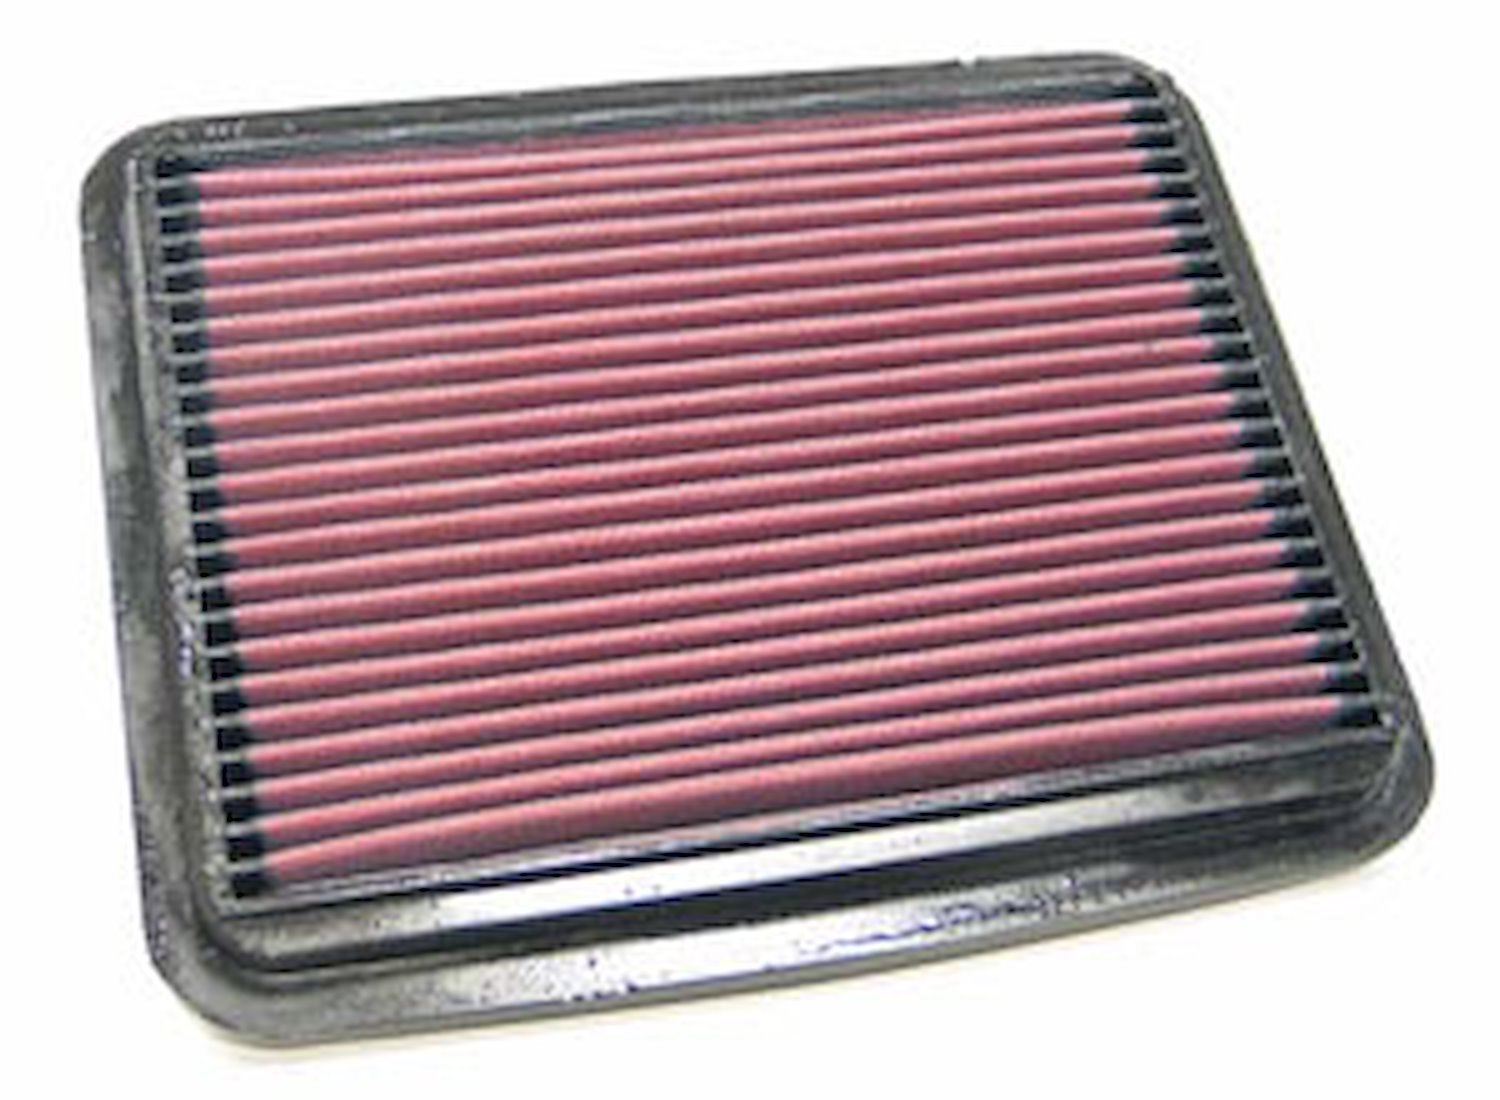 High-Performance OE-Style Replacement Filter 1998-2005 For Hyundai Fits XG300/350